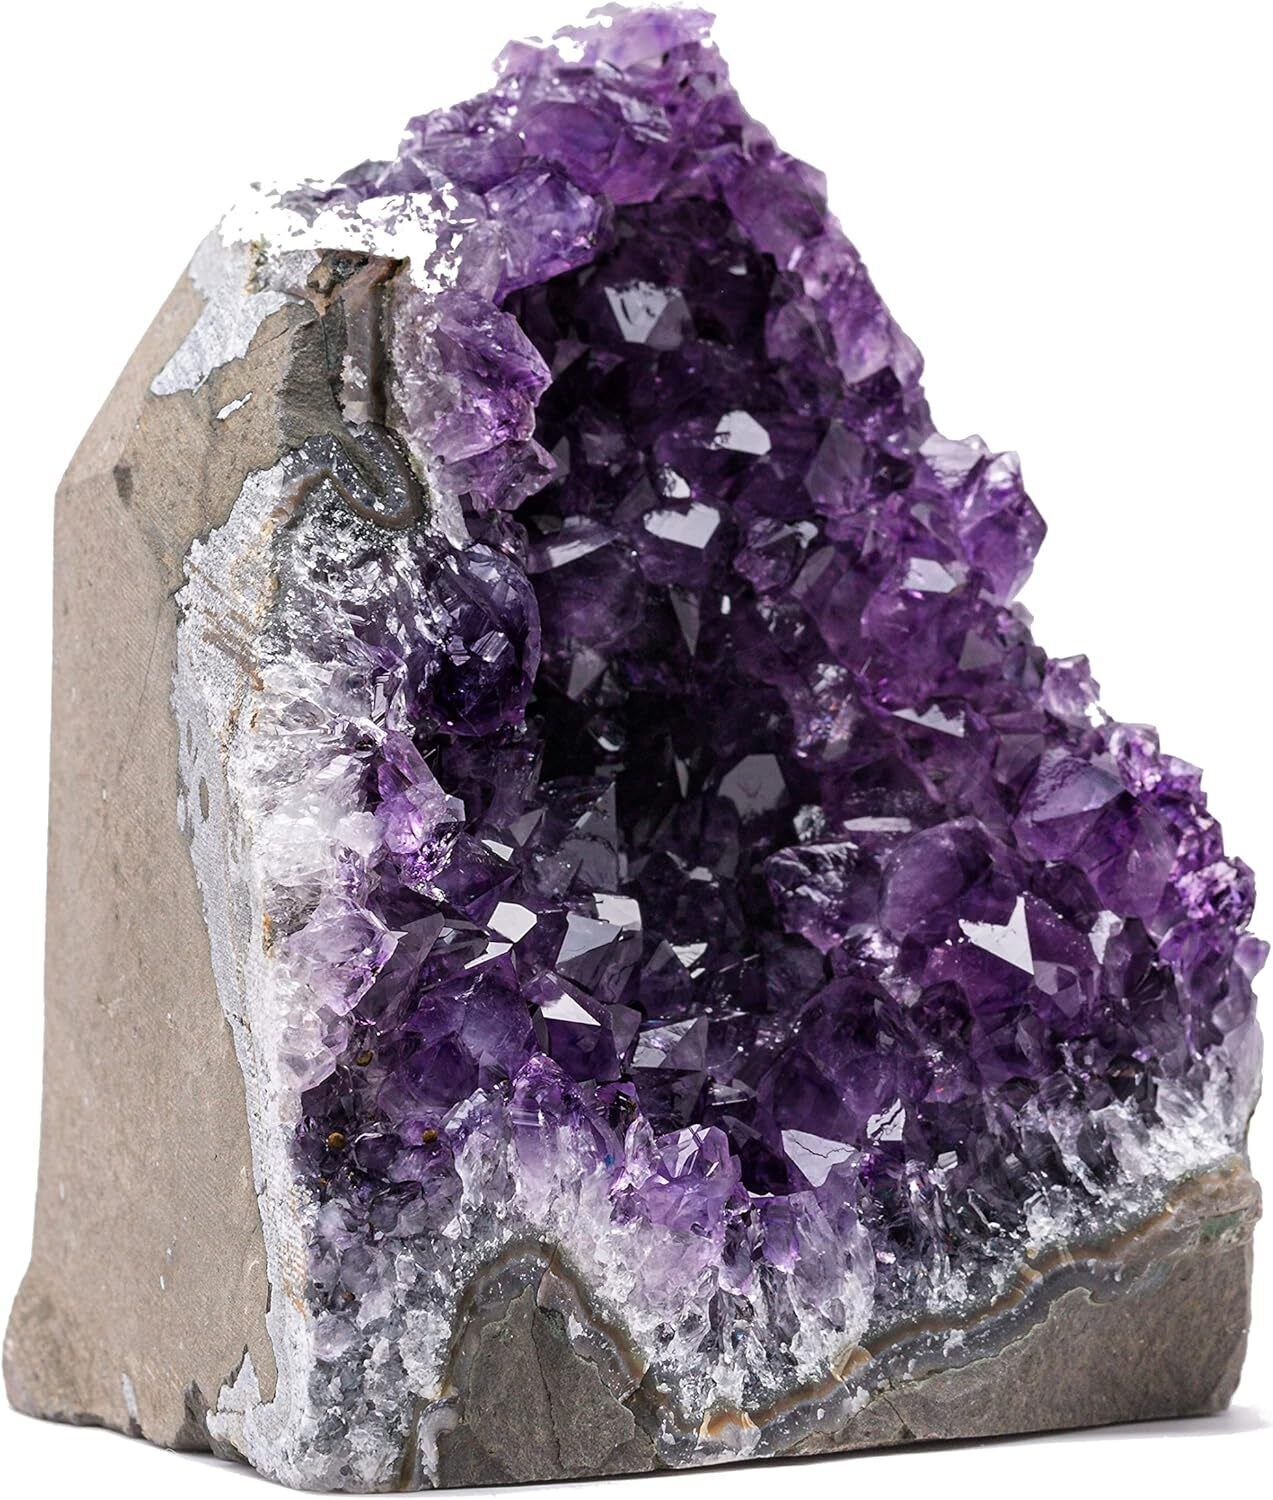 Natural Amethyst (2 lb to 3 lb) Crystal Clusters Stone from Uruguay Raw Geode